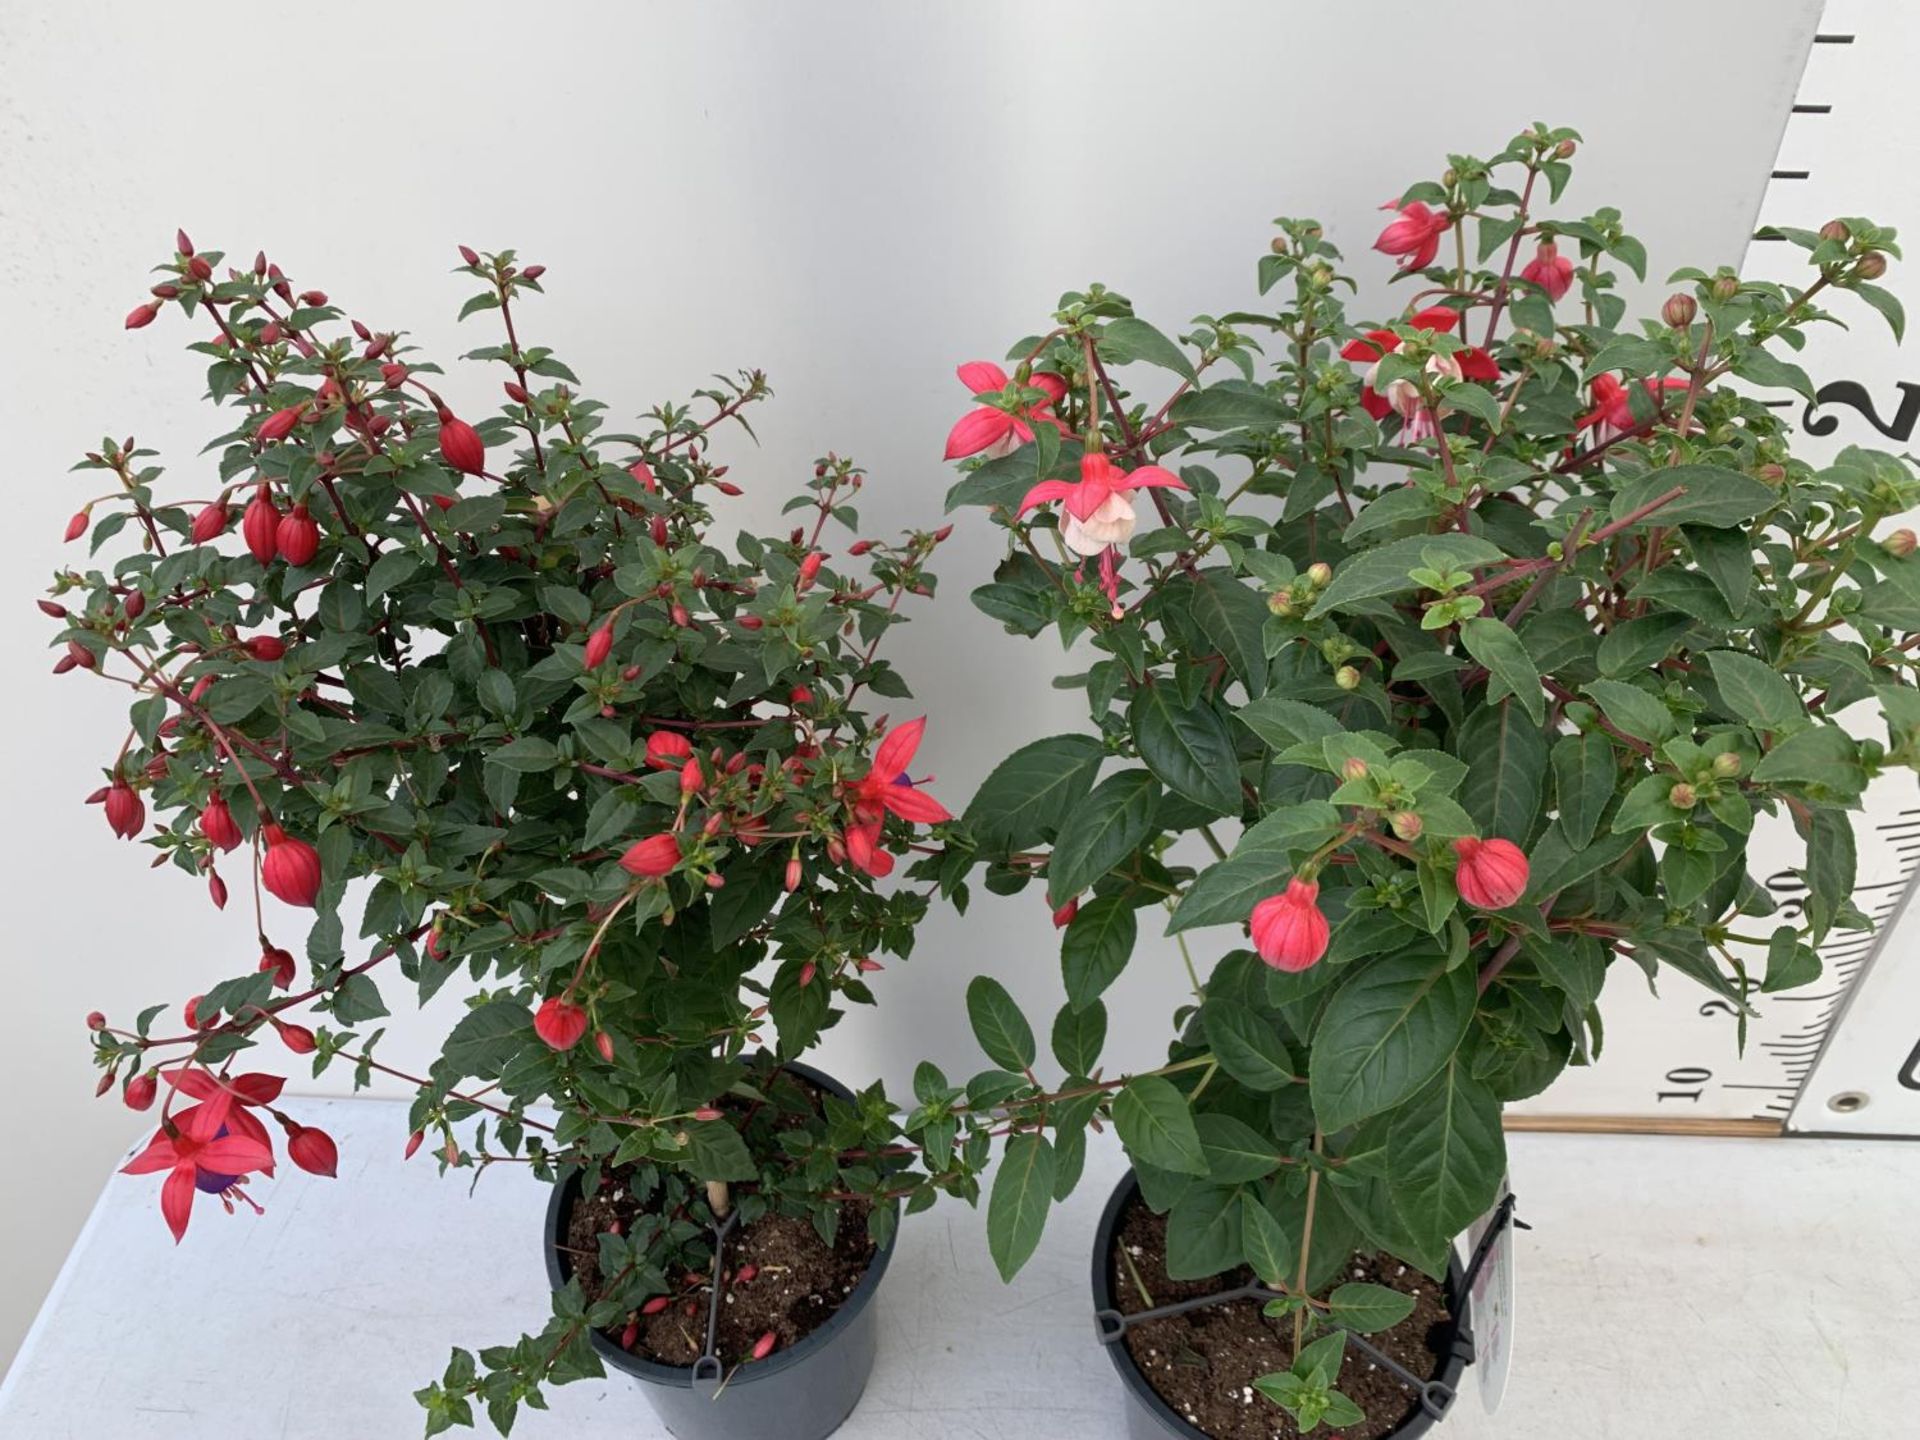 TWO BELLA STANDARD RED/WHITE AND RED/PURPLE FUCHSIA IN A 3 LTR POTS 70CM -80CM TALL TO BE SOLD FOR - Image 2 of 5